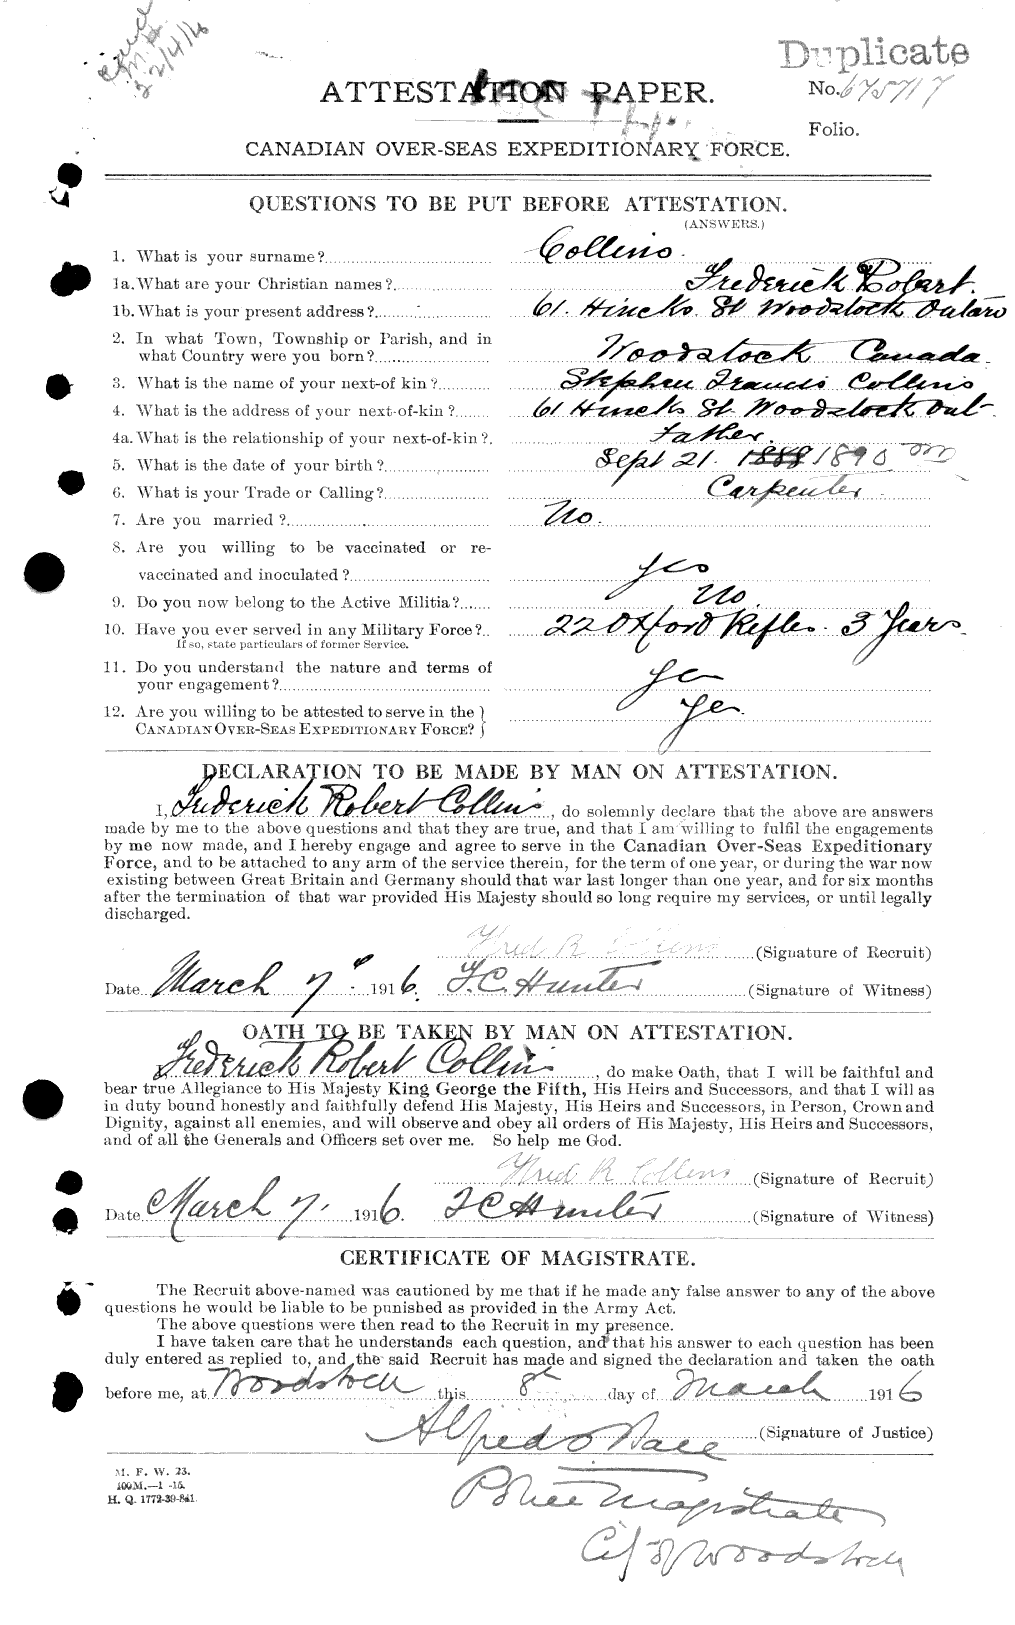 Personnel Records of the First World War - CEF 037838a